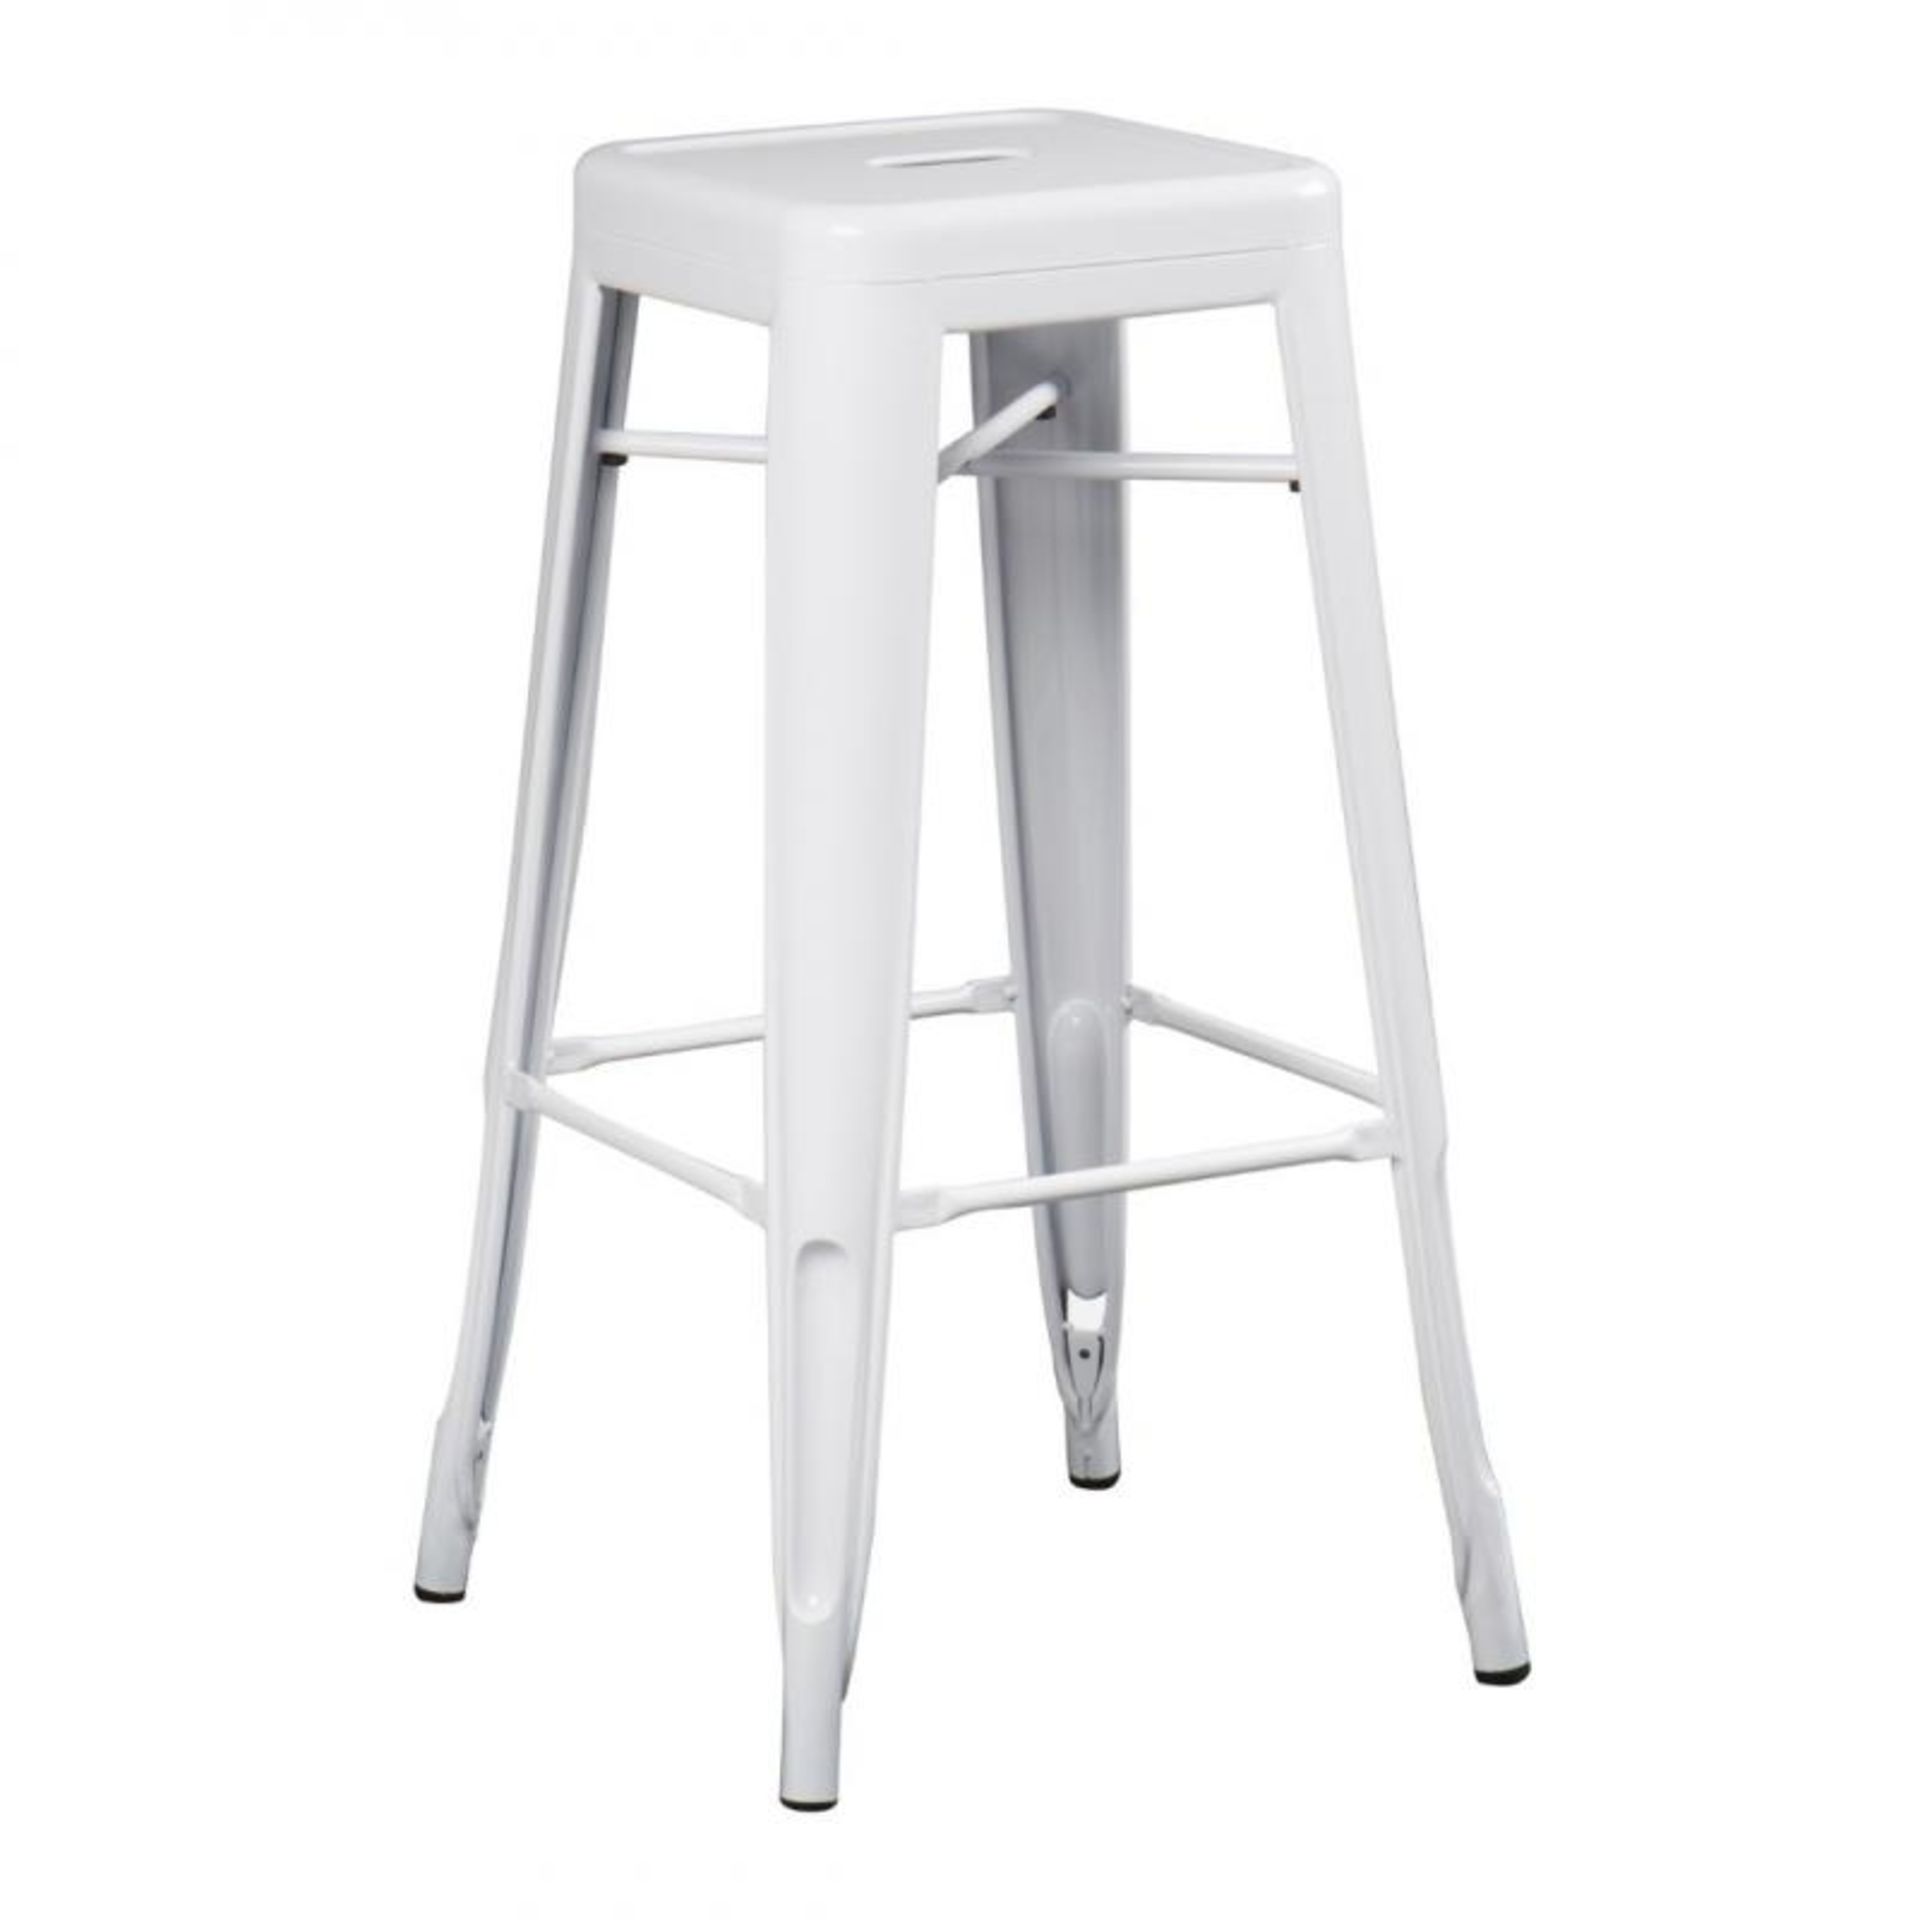 2 x Xavier Pauchard / Tolix Inspired Industrial WHITE Bar Stools - Pair of - Lightweight and Stackab - Image 2 of 4